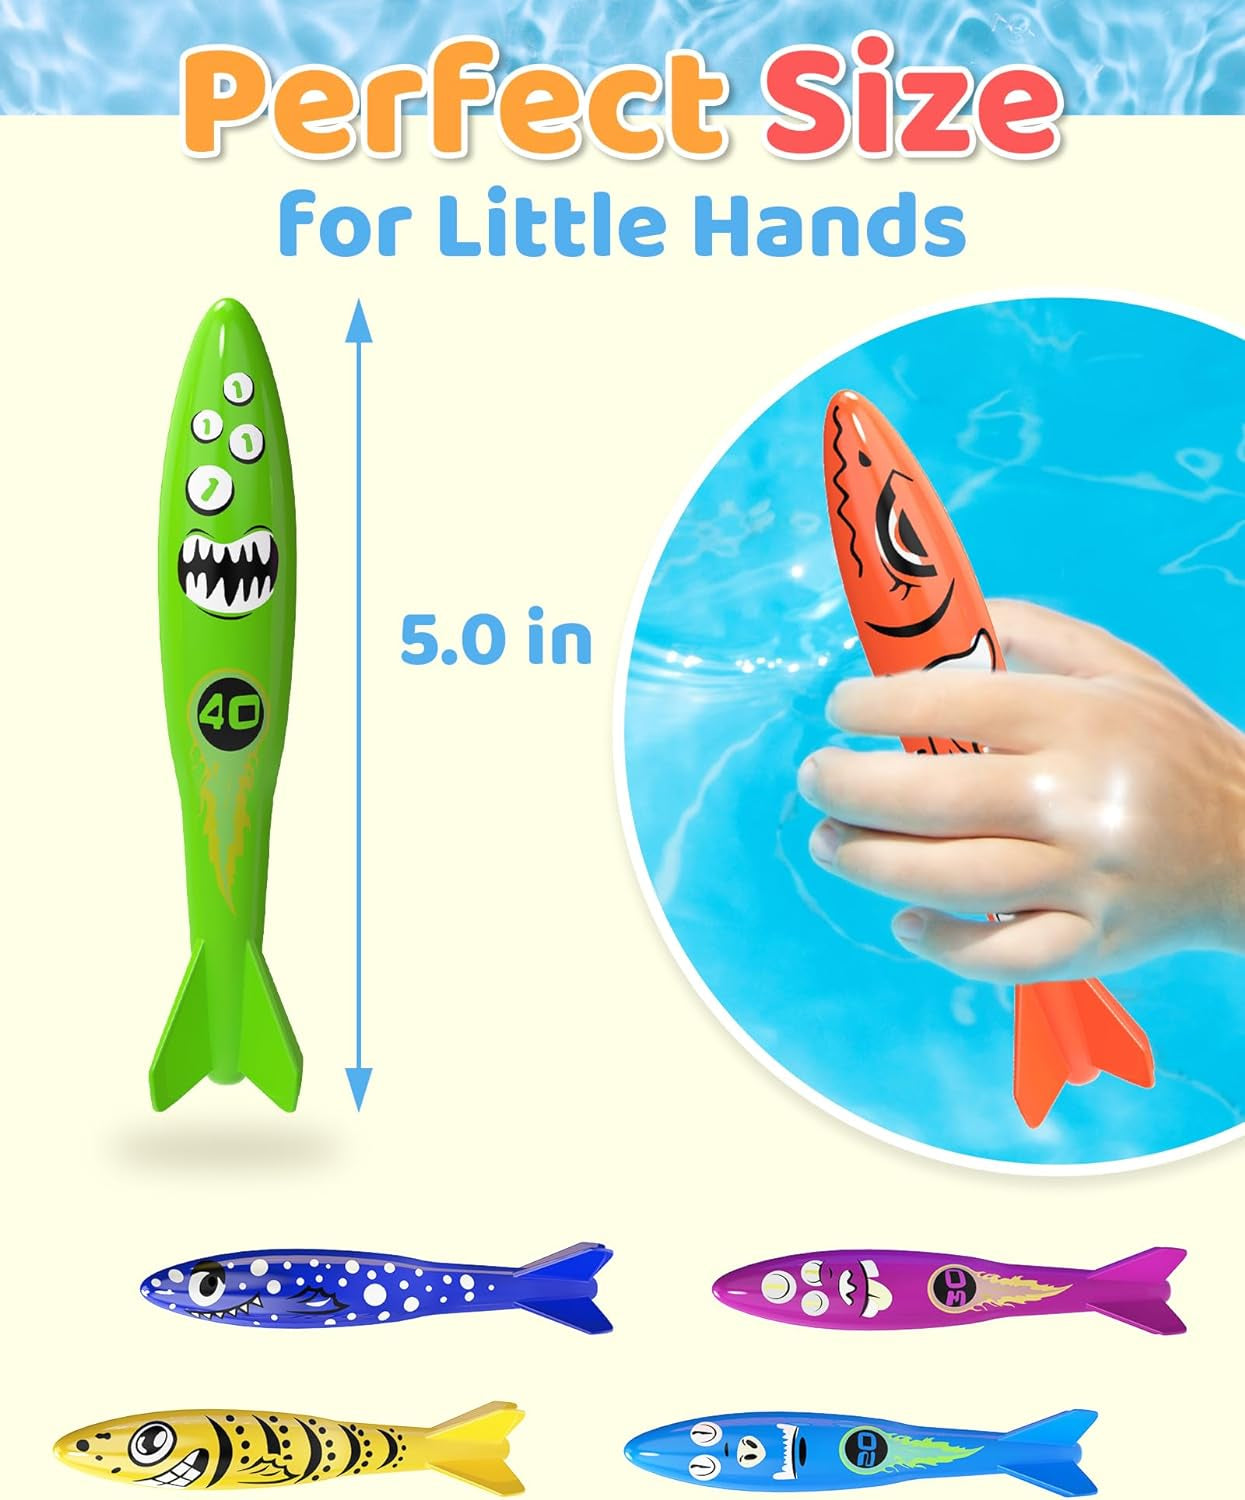 Pool Toys for Kids Ages 4-8, 8 Pcs Diving Toys for Pool for Kids, Summer Swimming Pool Toys, Pool Sinking Torpedoes Toys, Dive Toys for Kids Ages 4-8 8-12